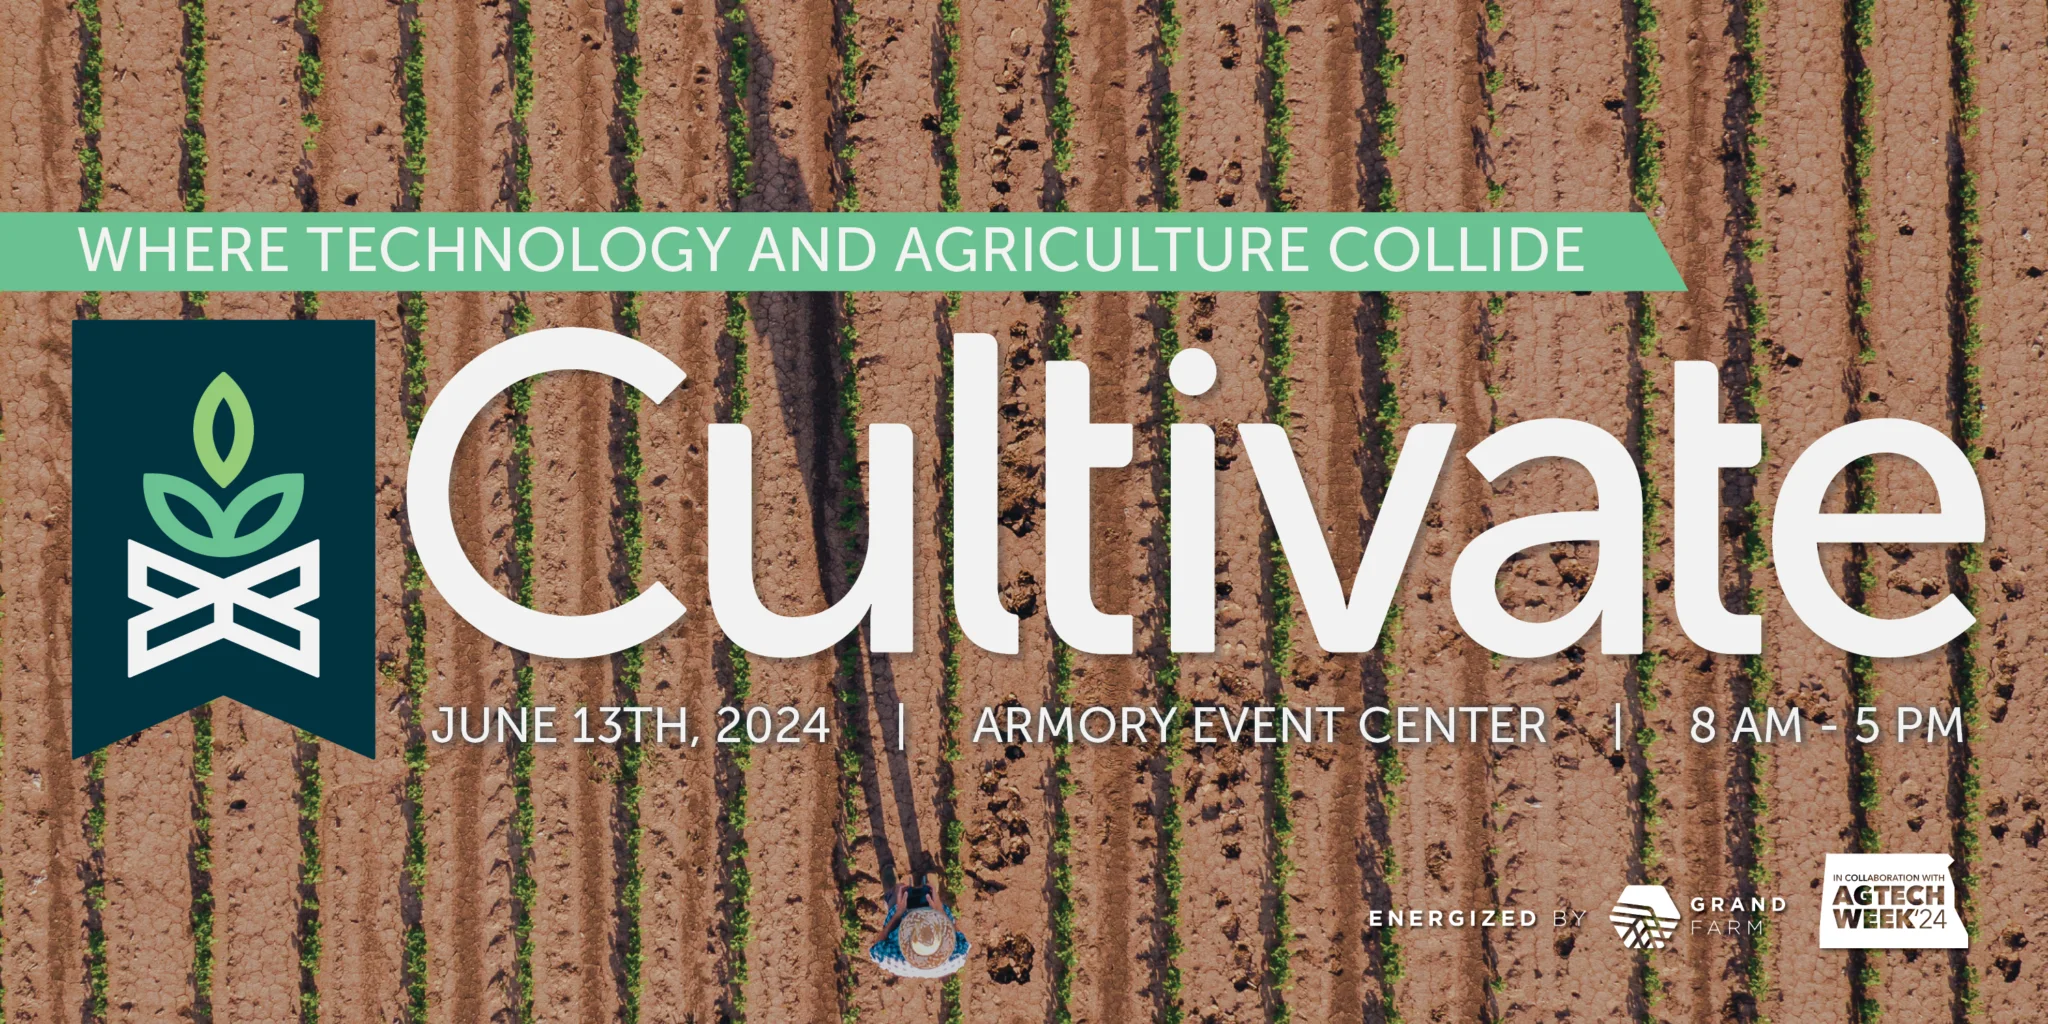 Cultivate, June 13th, 2024, Armory Event Center, 8AM to 5PM